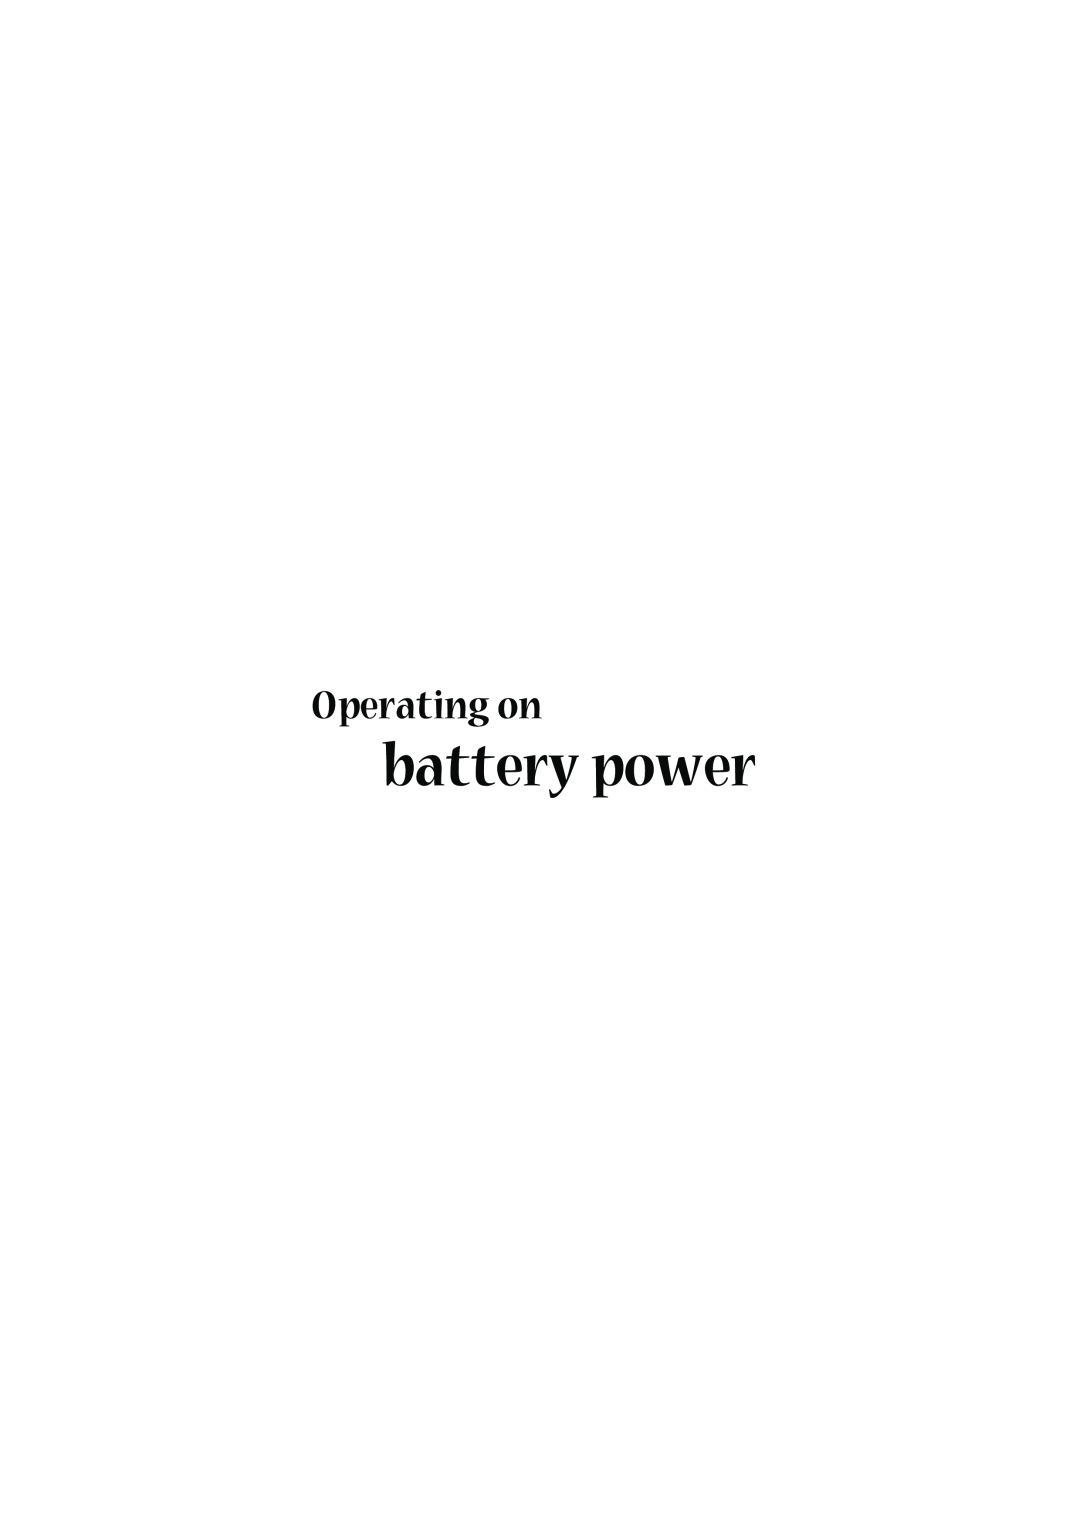 Acer 1450 manual battery power, Operating on 